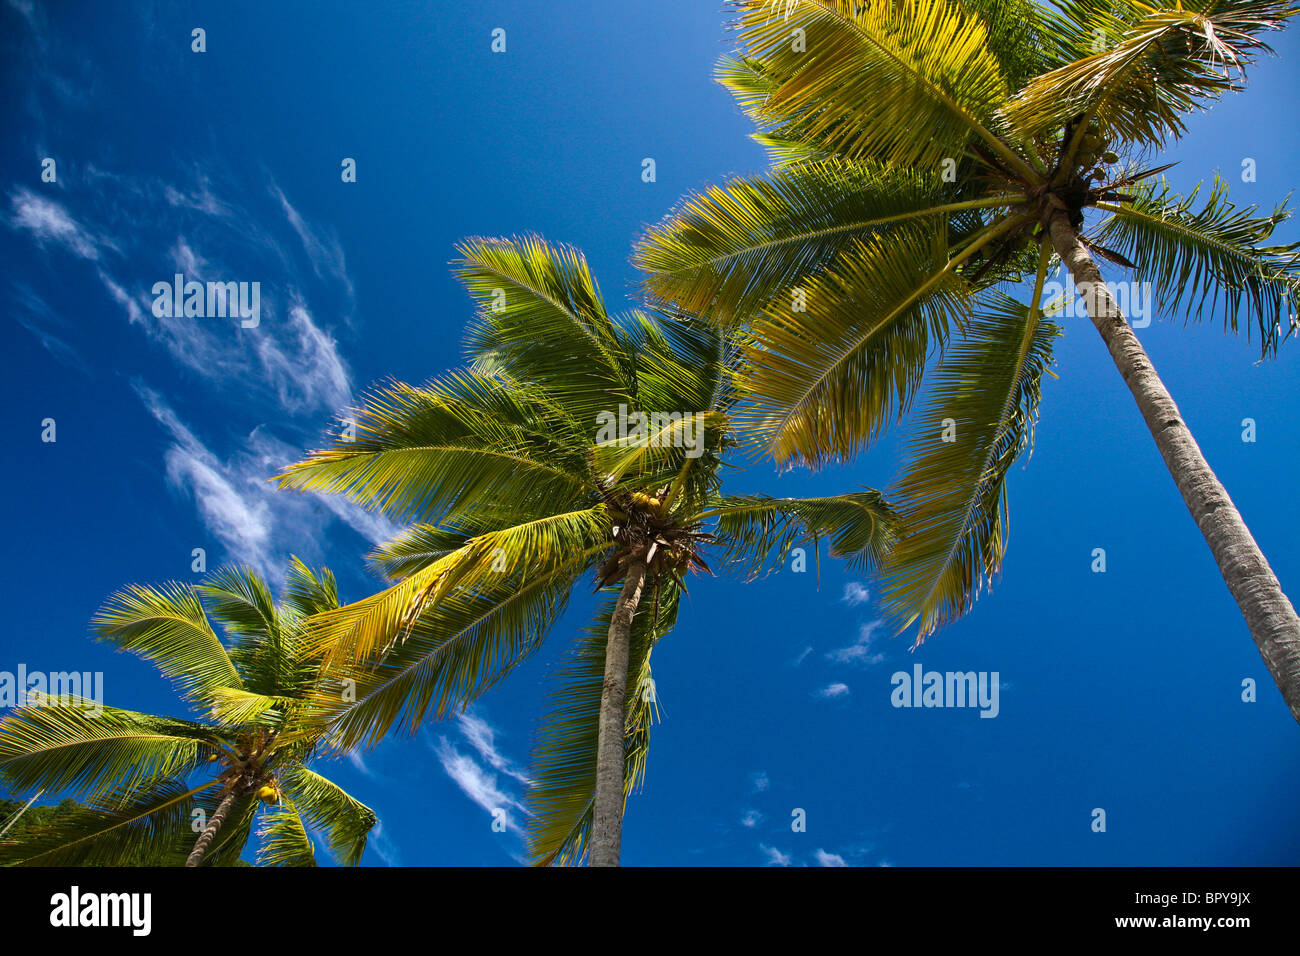 Creative abstract view of isolated Palm trees on a beach and deep blue skies in Saint Thomas Island, POV looking up, coastal bright future nature Stock Photo